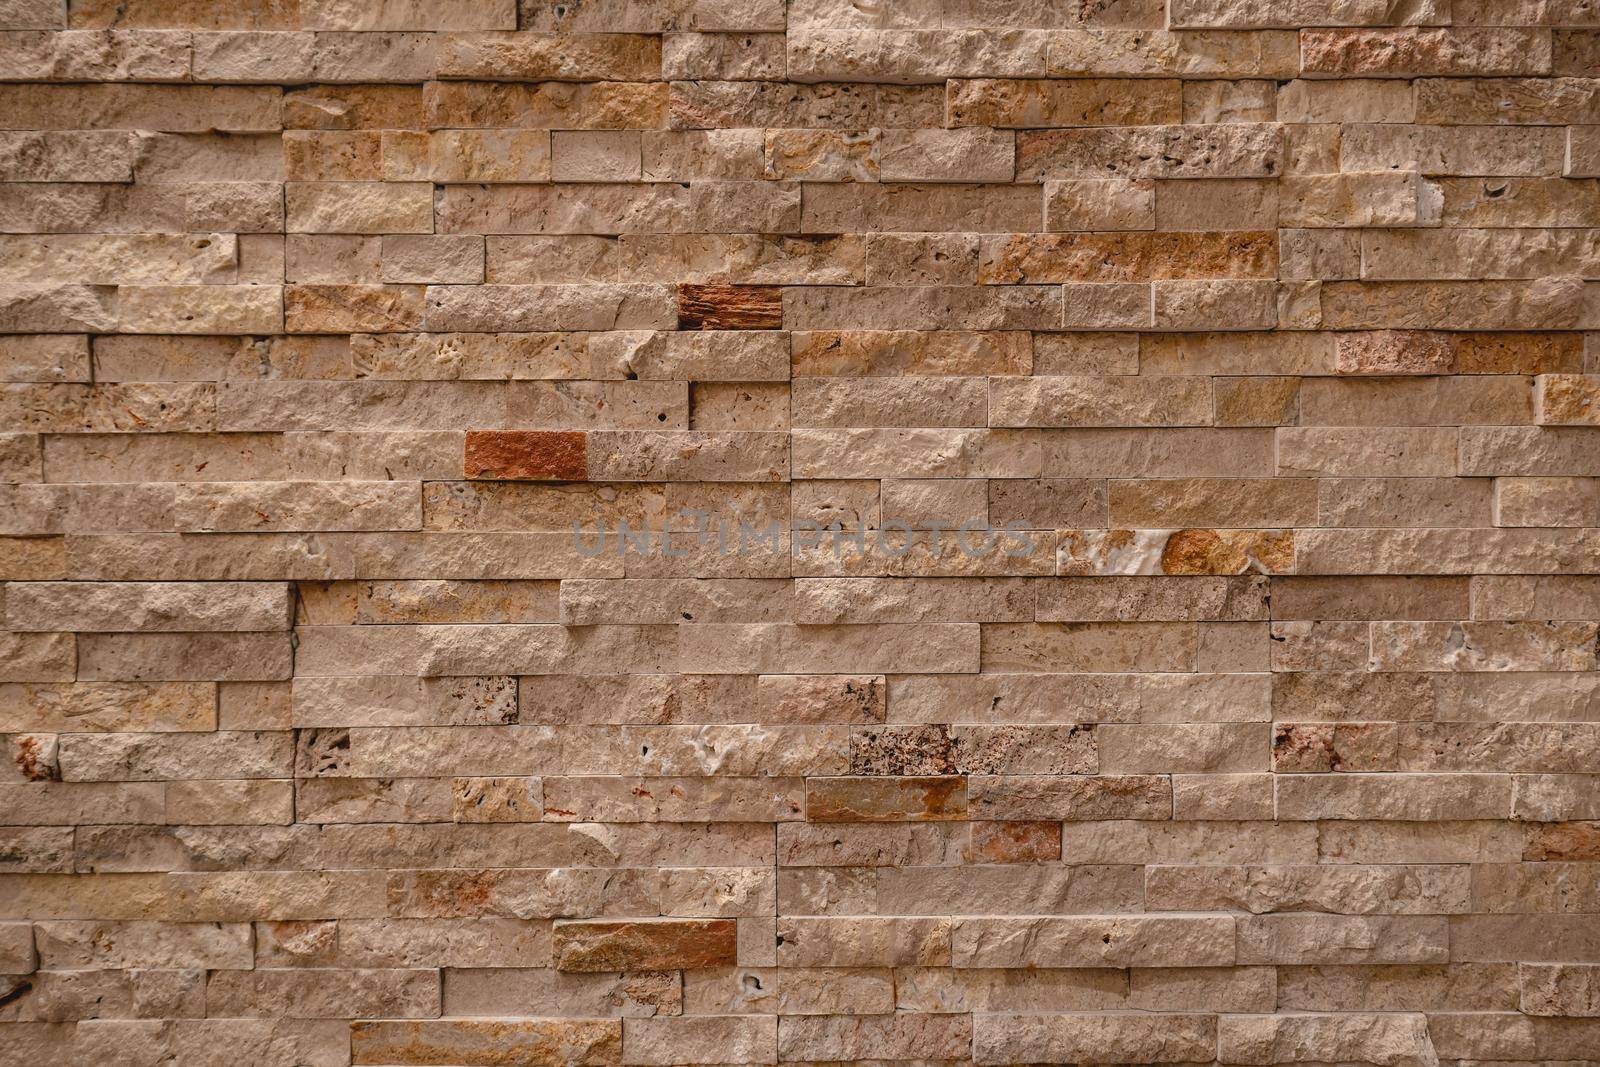 Black stone brick wall background, marbled textured. by sirawit99